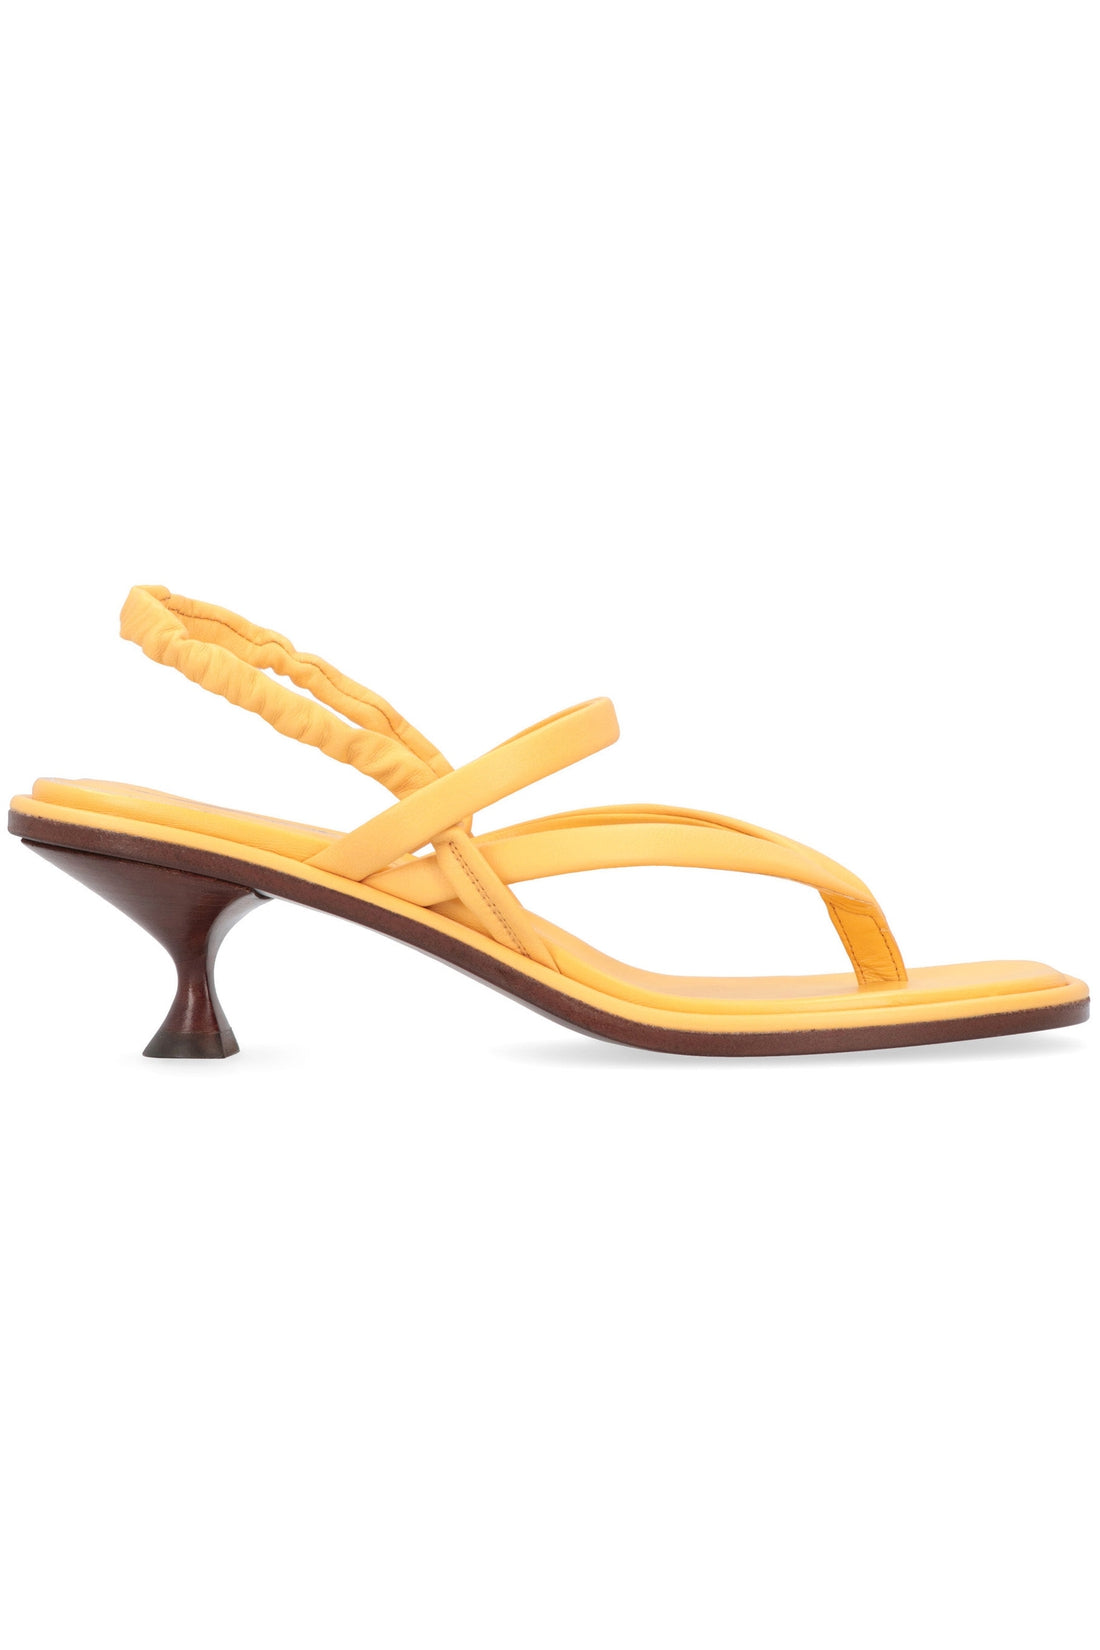 Tod's-OUTLET-SALE-Leather thong-sandals-ARCHIVIST